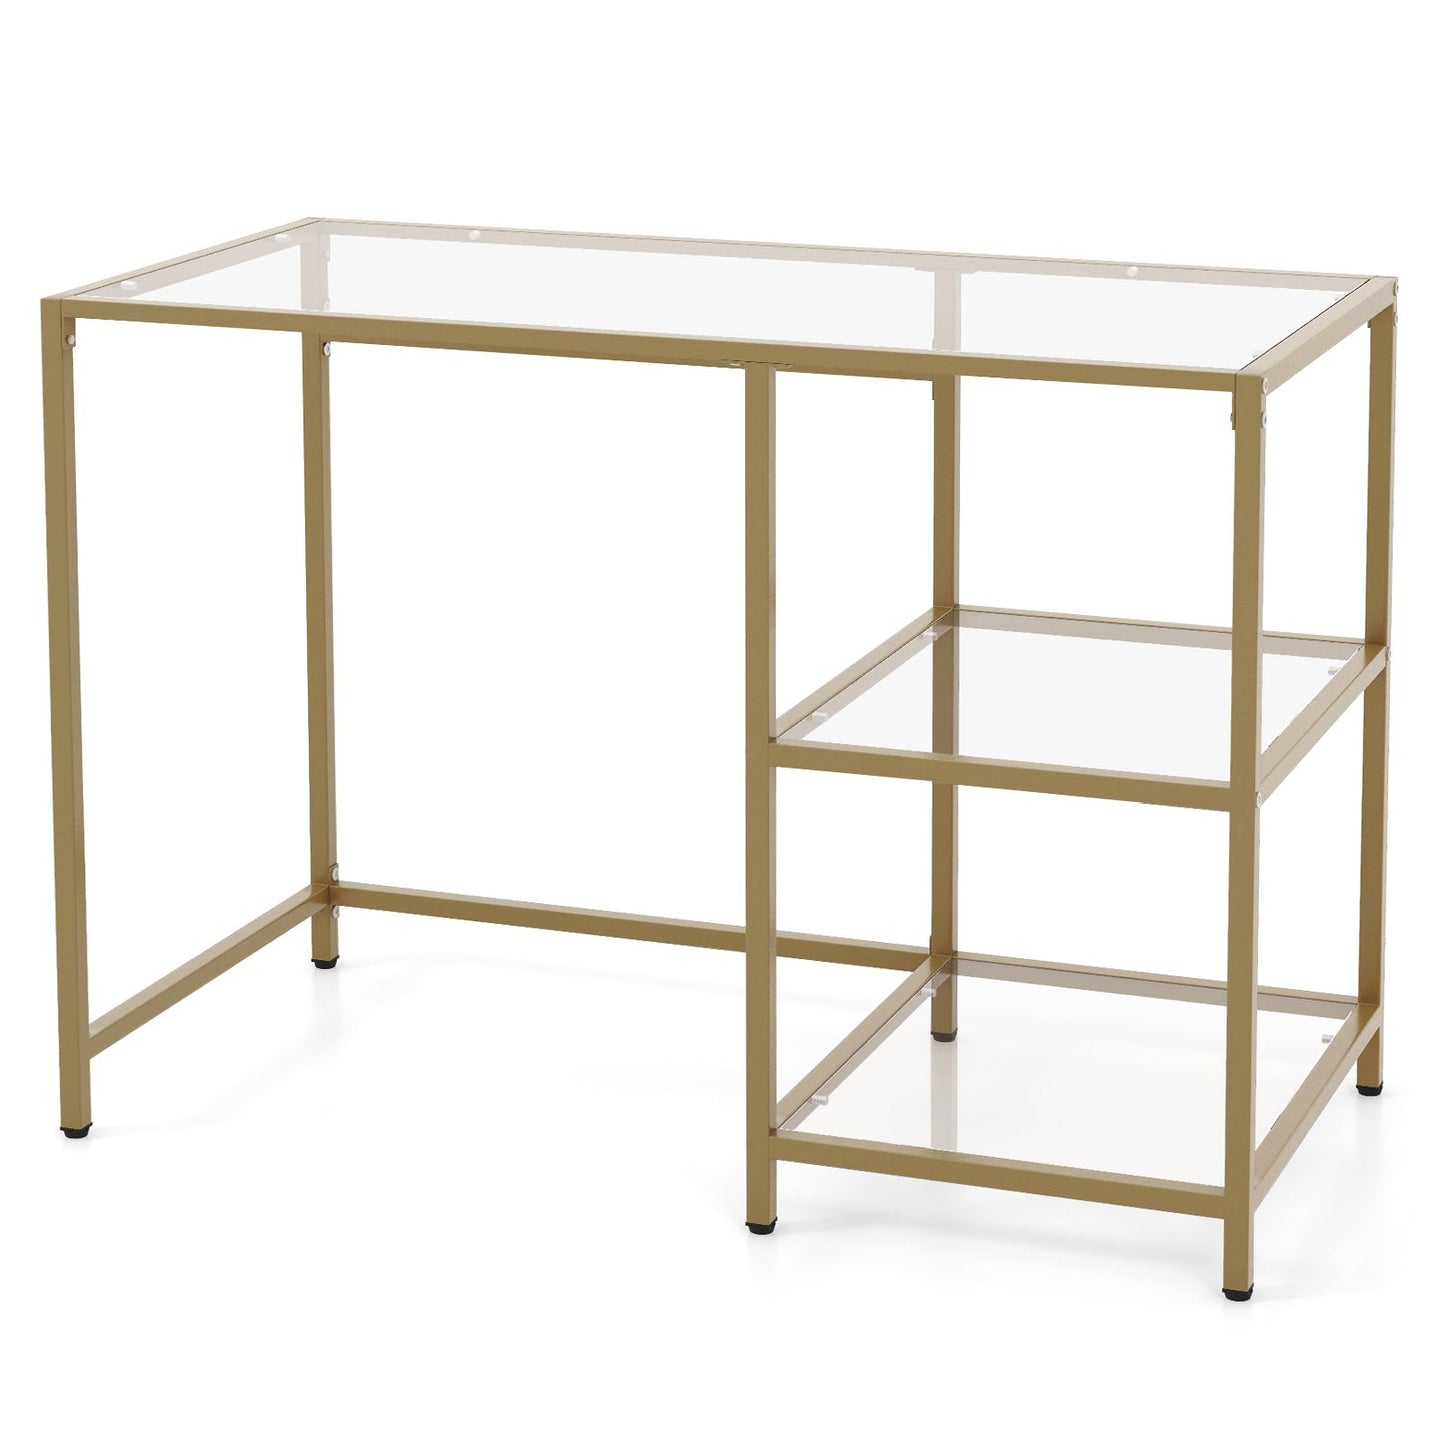 Modern Console Table with 2 Open Shelves and Metal Frame, Golden